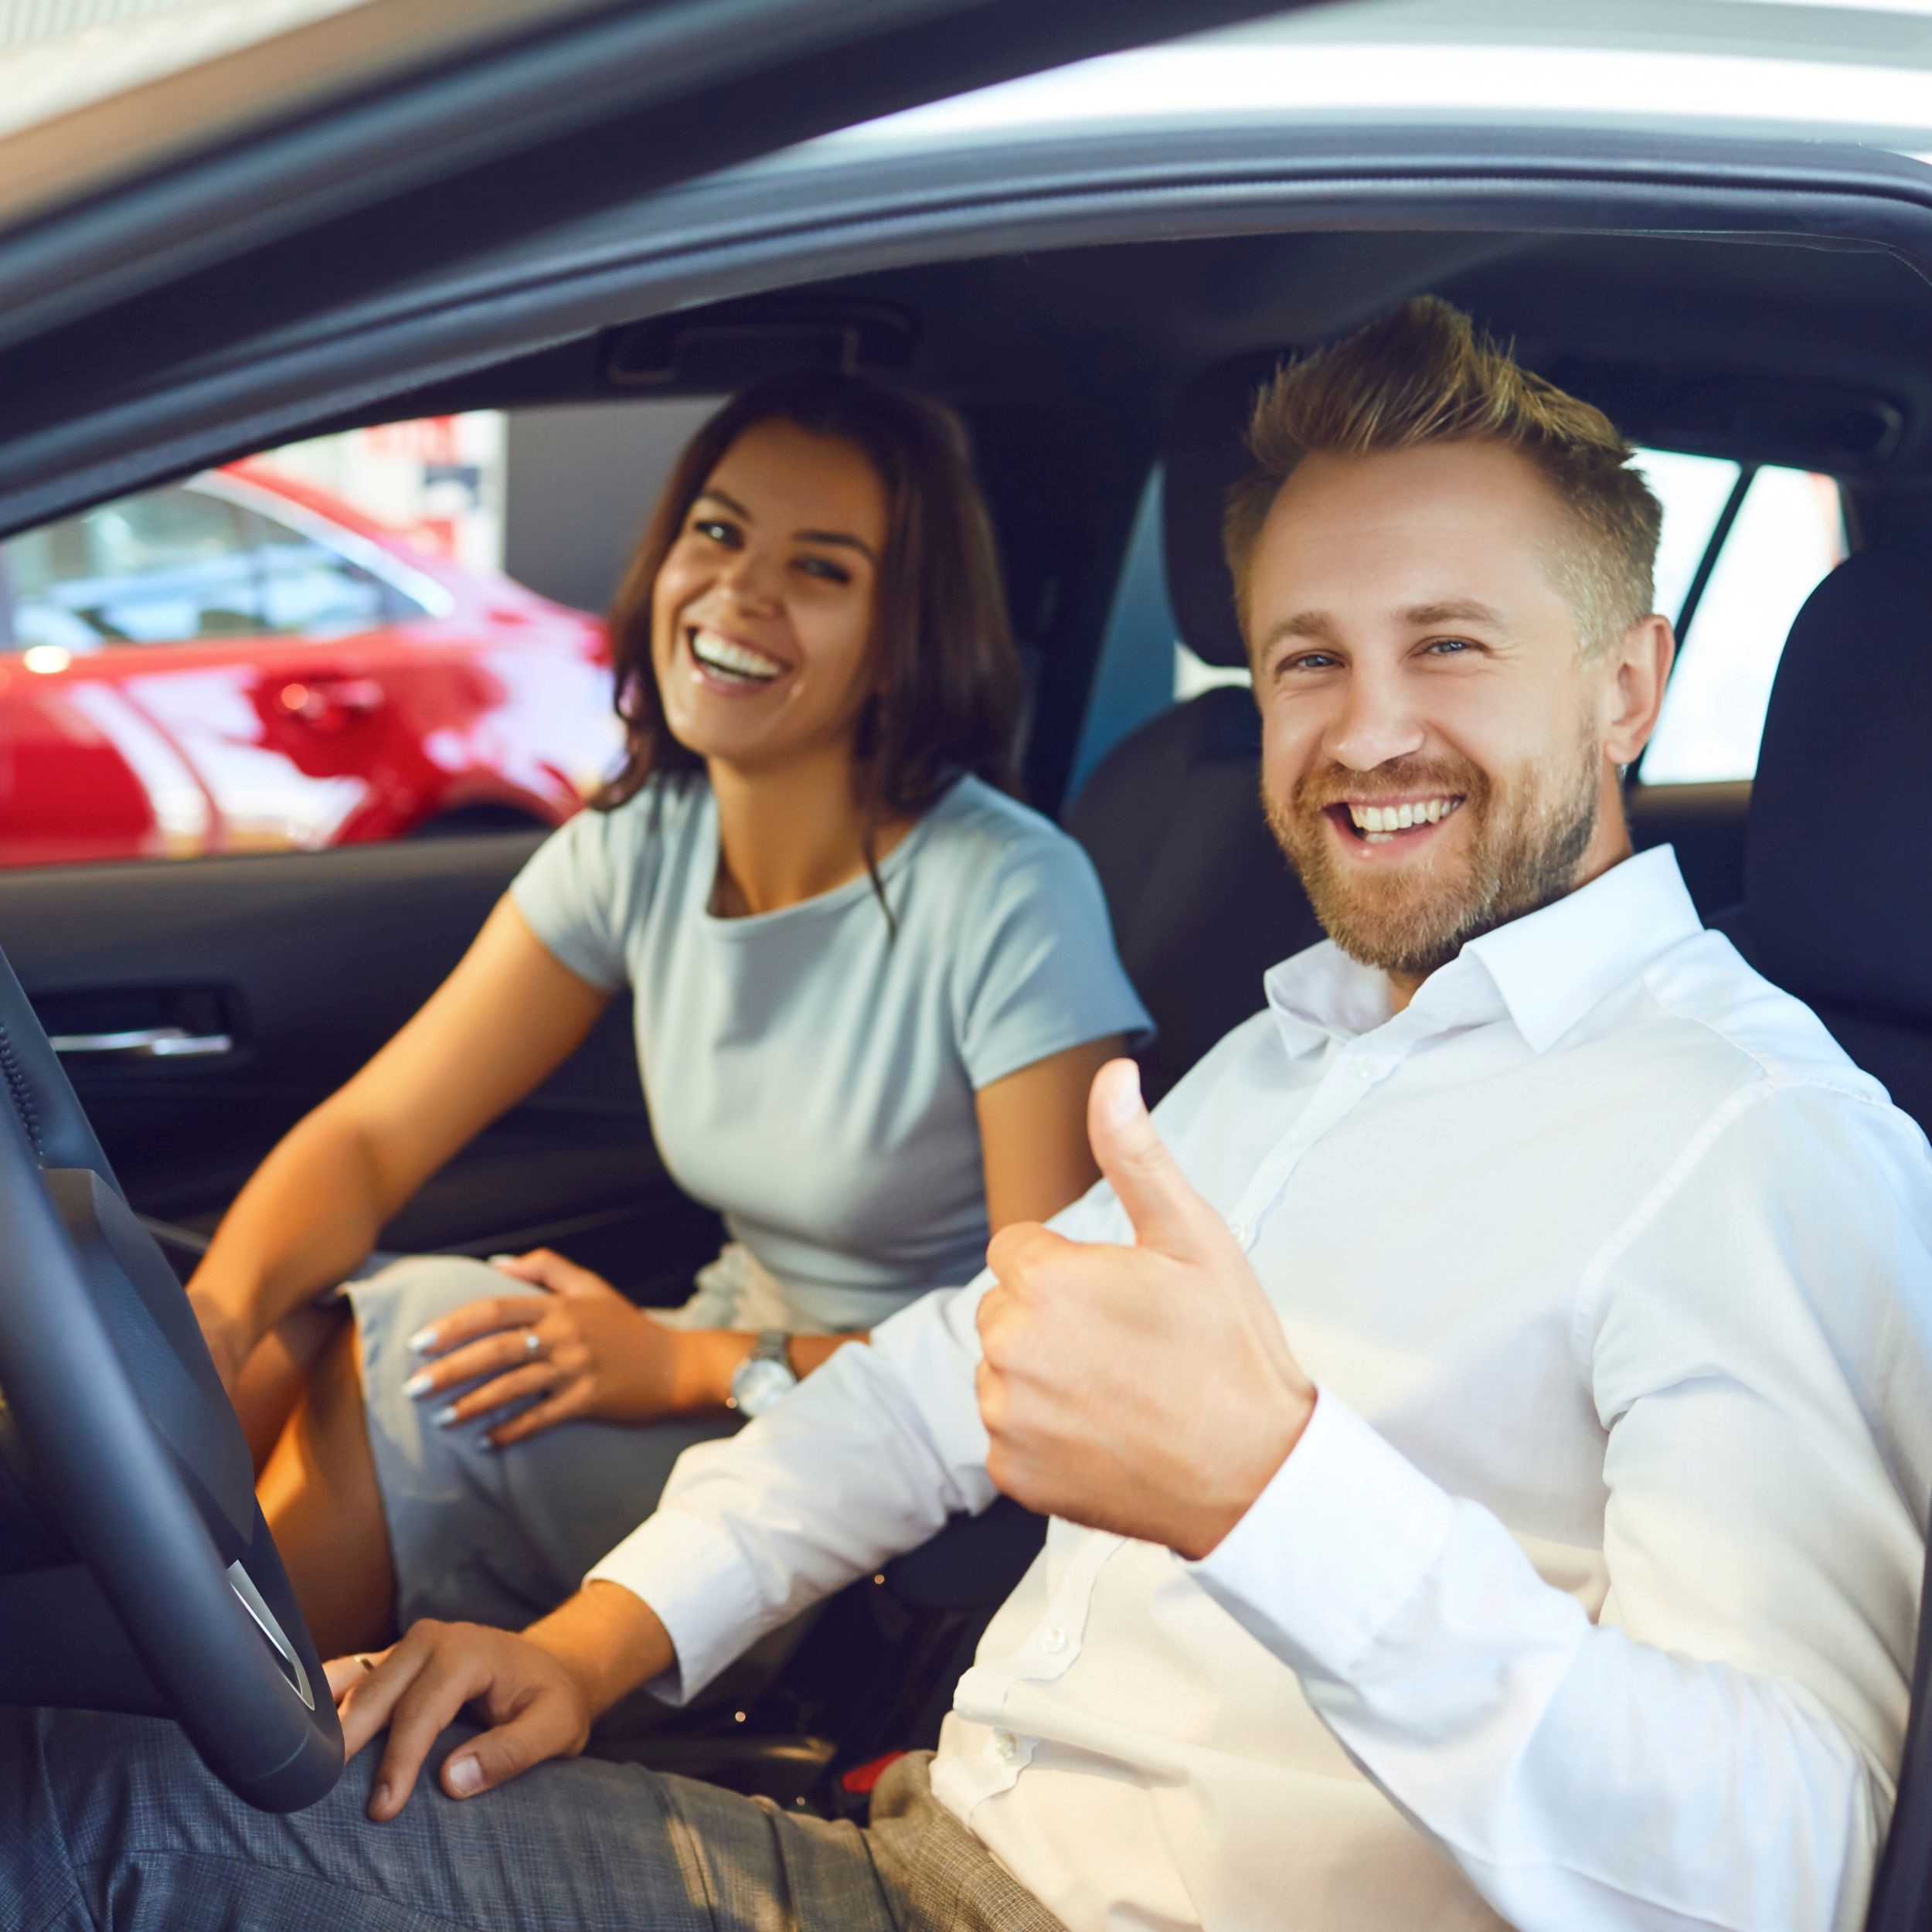 Auto Dealerships Customer Experience with CRM Rewards Program